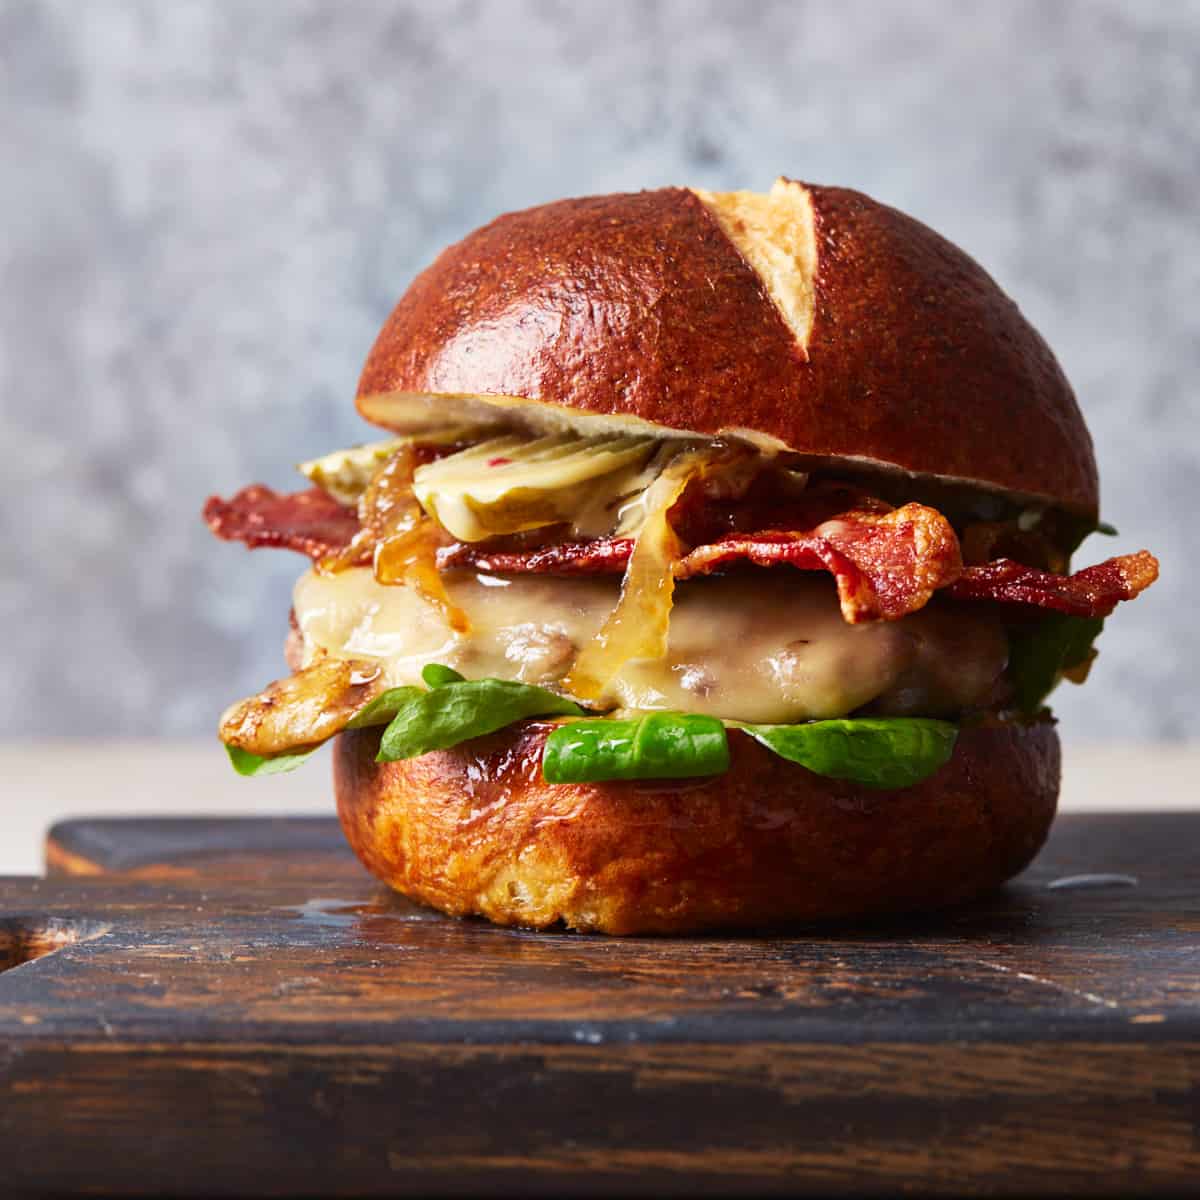 Pretzel bun filled with burger, cheese, bacon, sauce, lettuce, and pickles on a cutting board